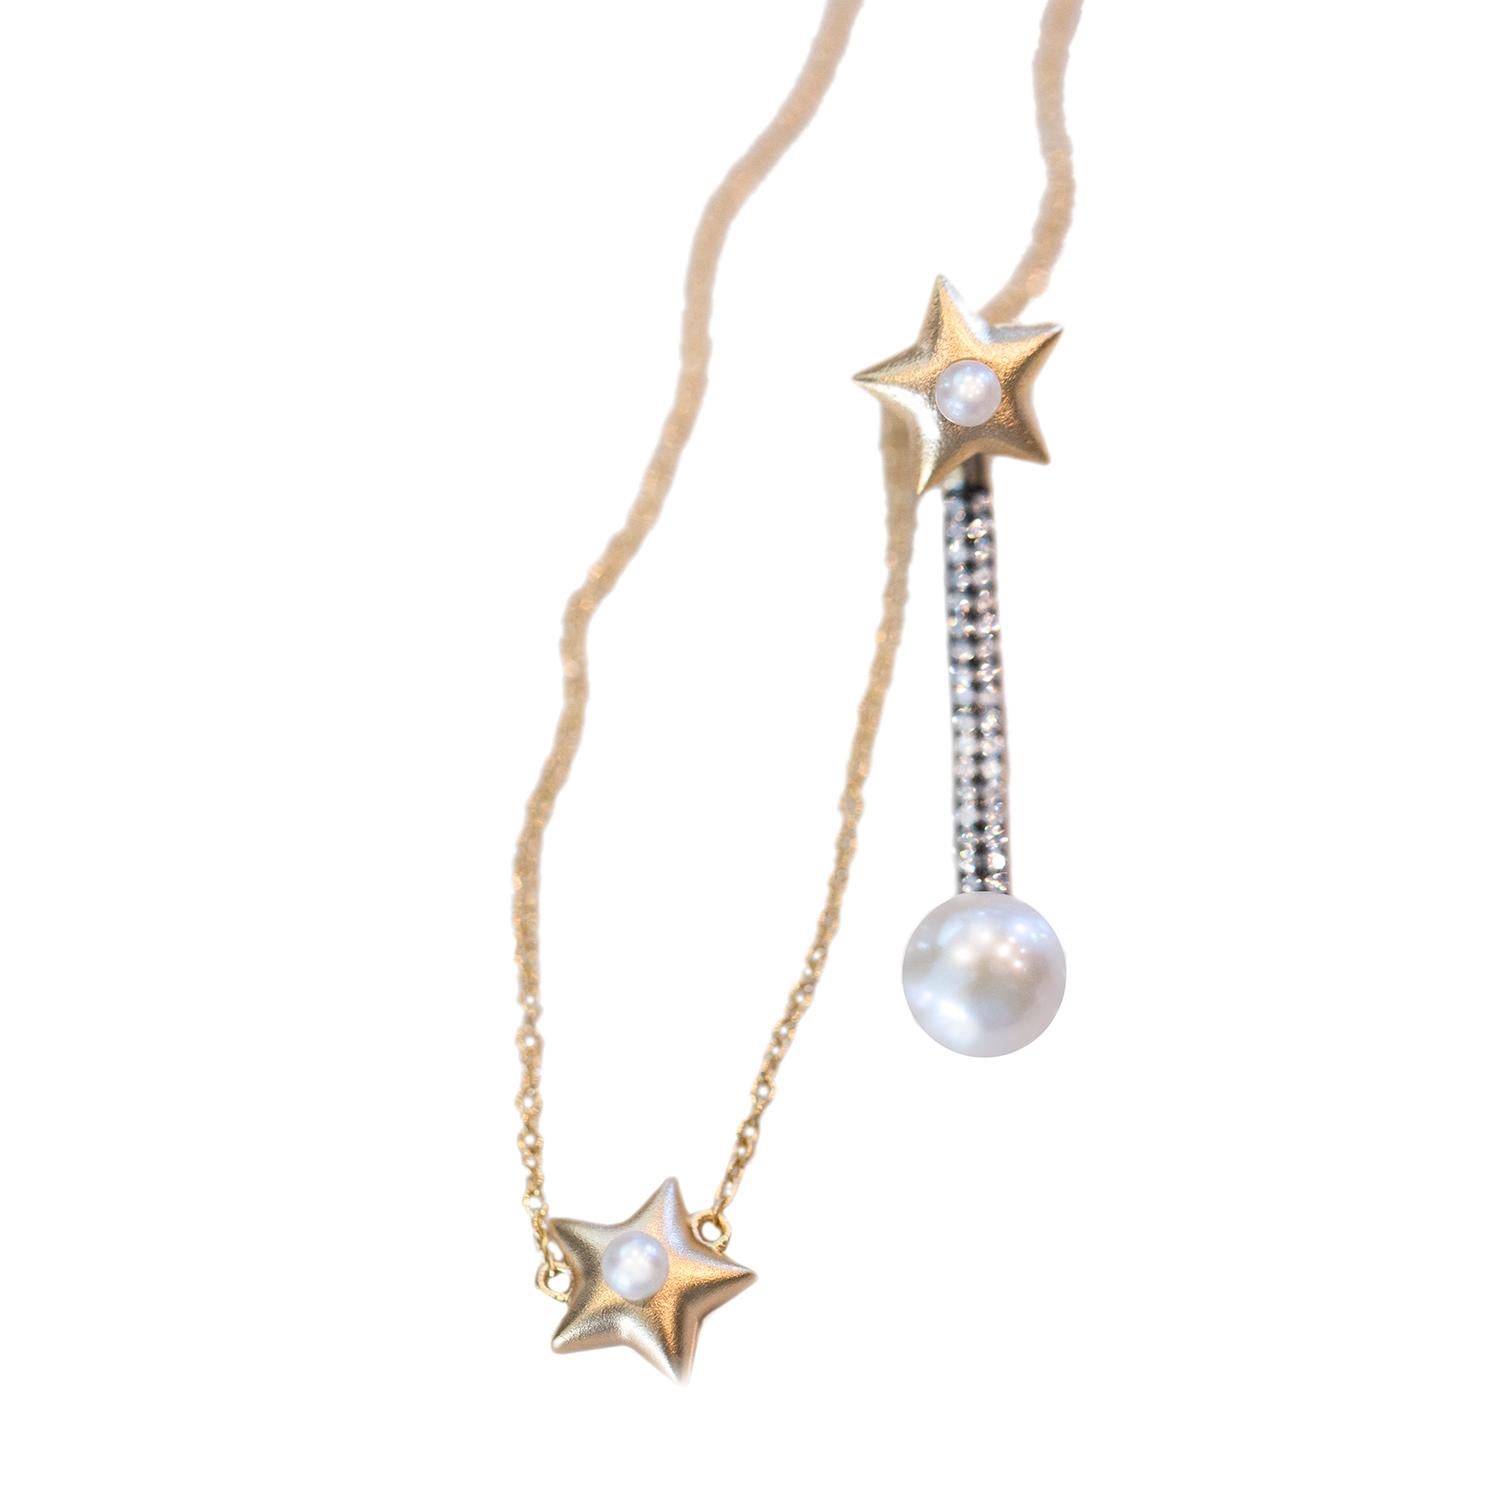 Contemporary Ammanii Star Jacket Earrings with Pearls and Zircon in Vermeil Gold